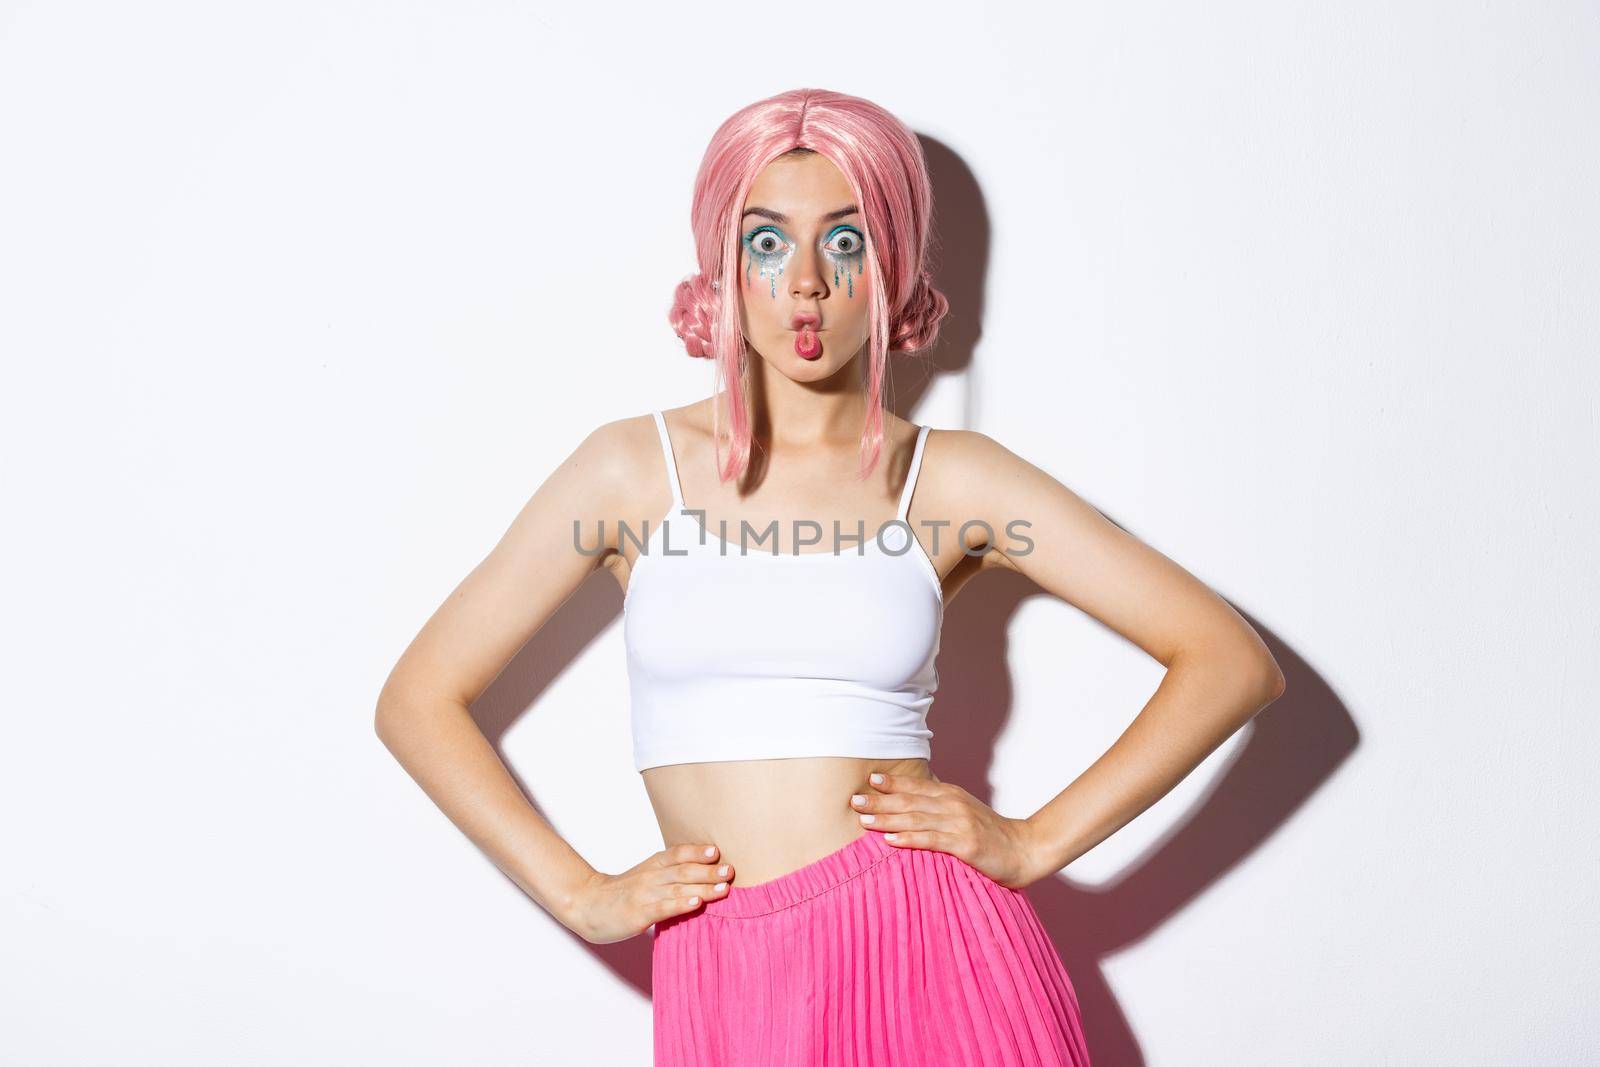 Image of silly party girl with pink wig and bright makeup, celebrating halloween, looking surprised, standing over white background.